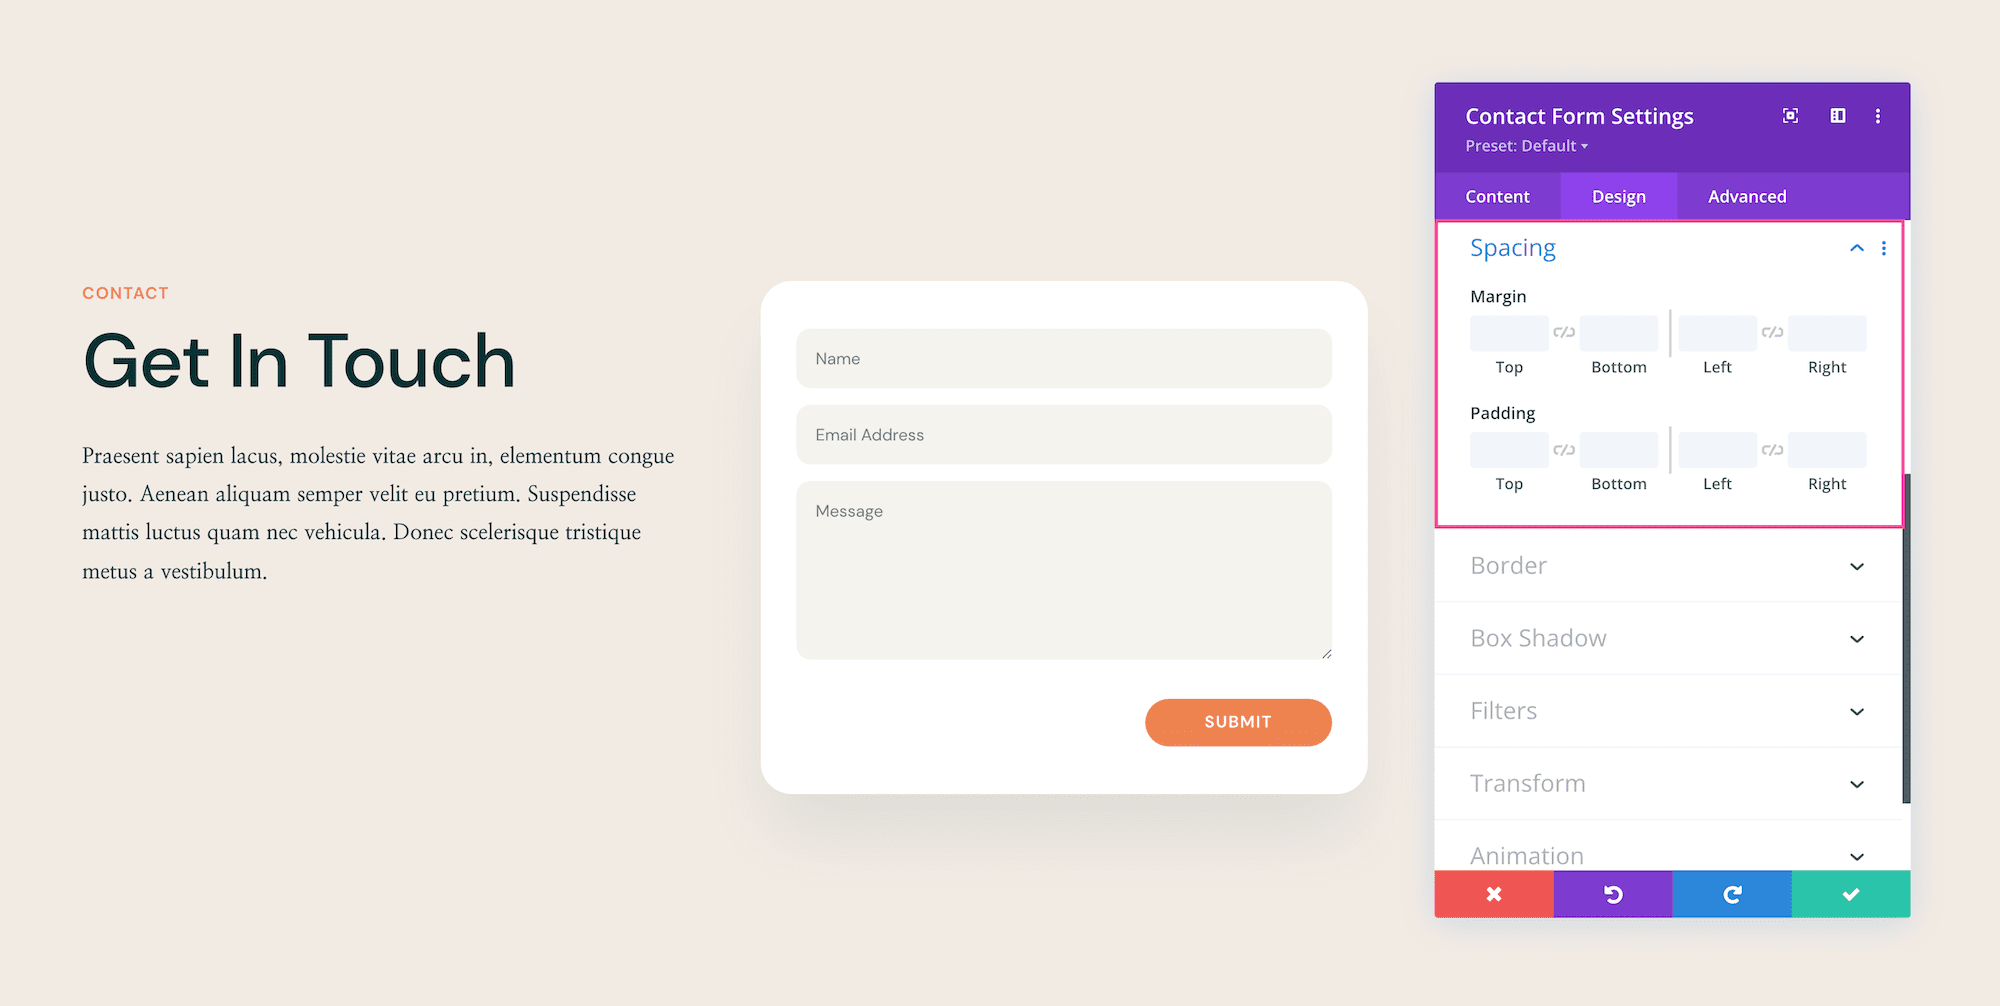 How to use the Divi Contact Form Module